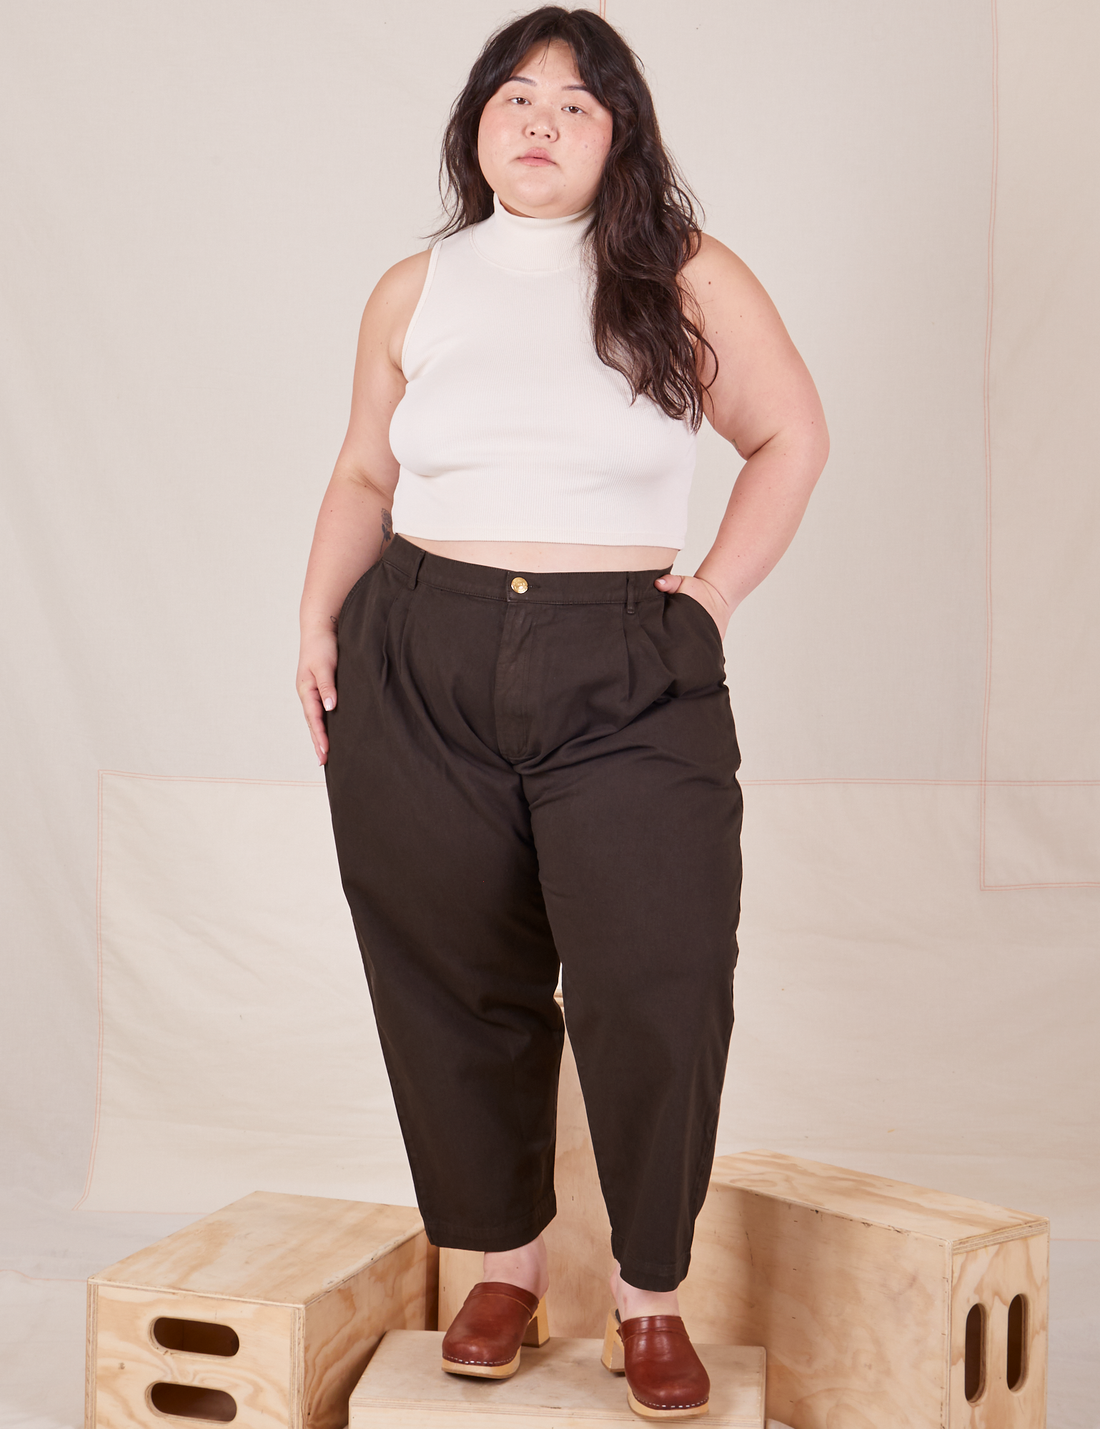 Ashley is 5'7" and wearing 1XL Petite Heavyweight Trousers in Espresso Brown paired with vintage off-white Sleeveless Turtleneck